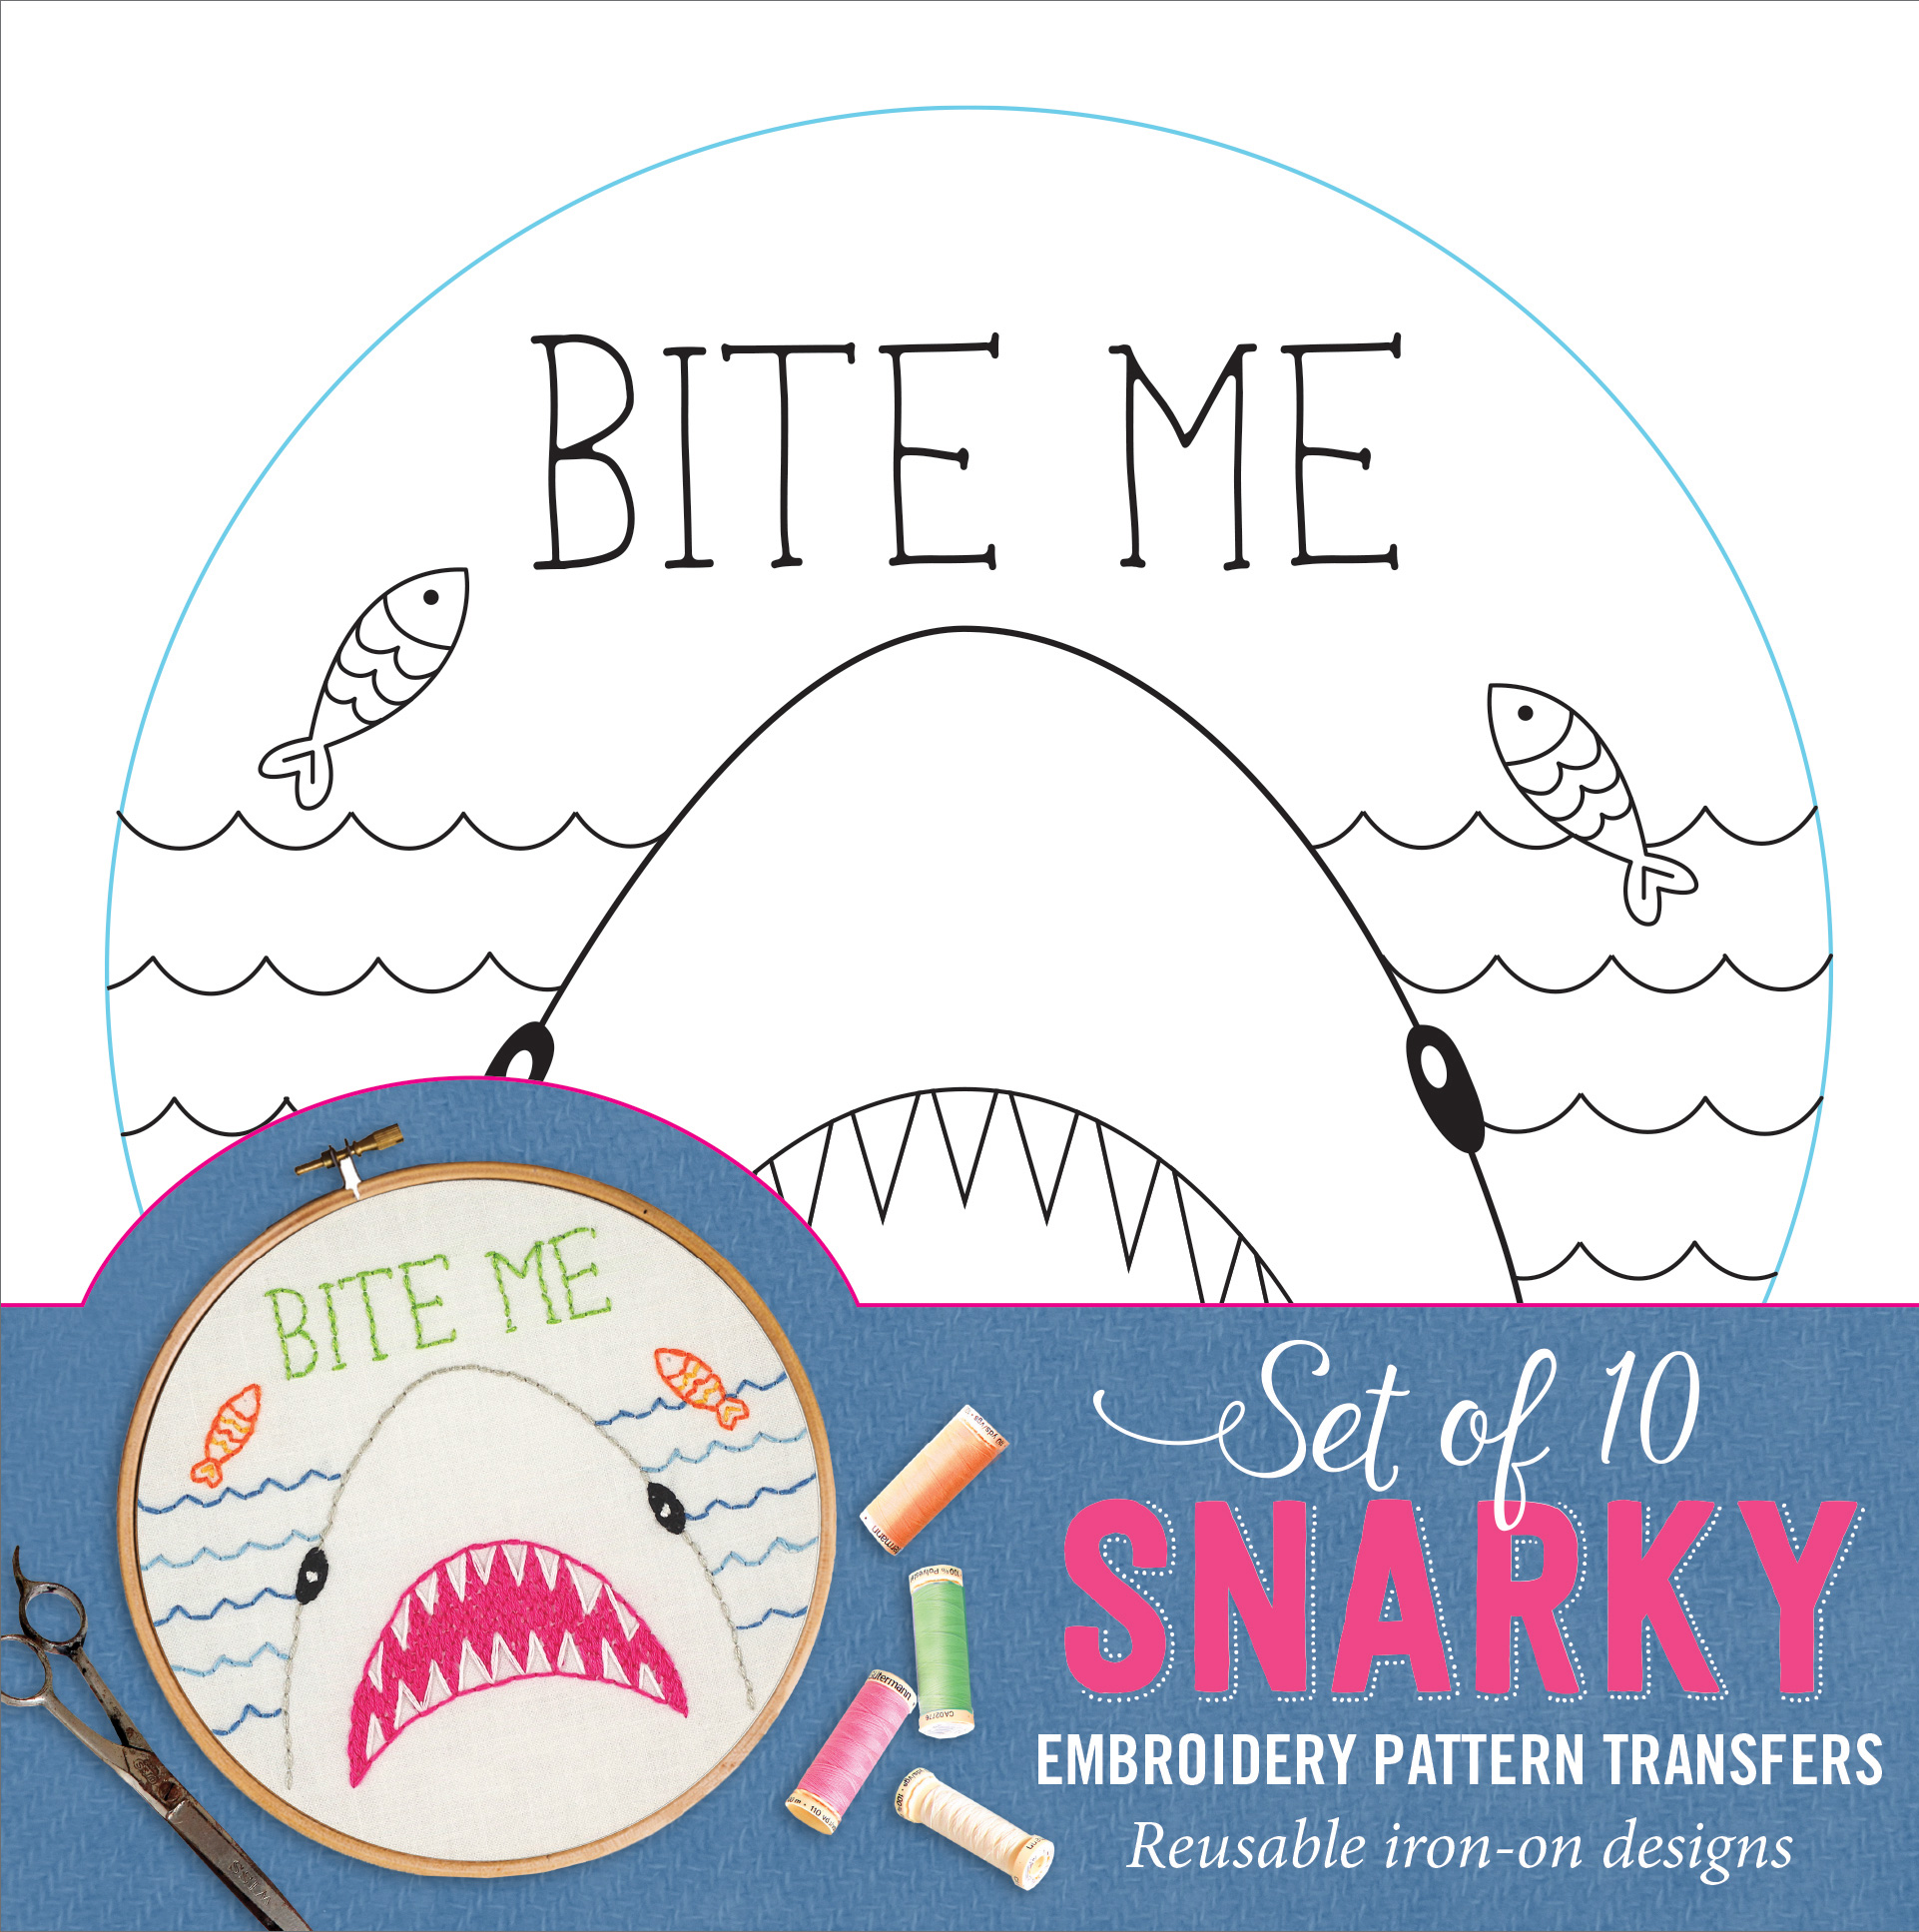 Snarky Embroidery Pattern Transfers: Reusable Iron-on Designs [Book]